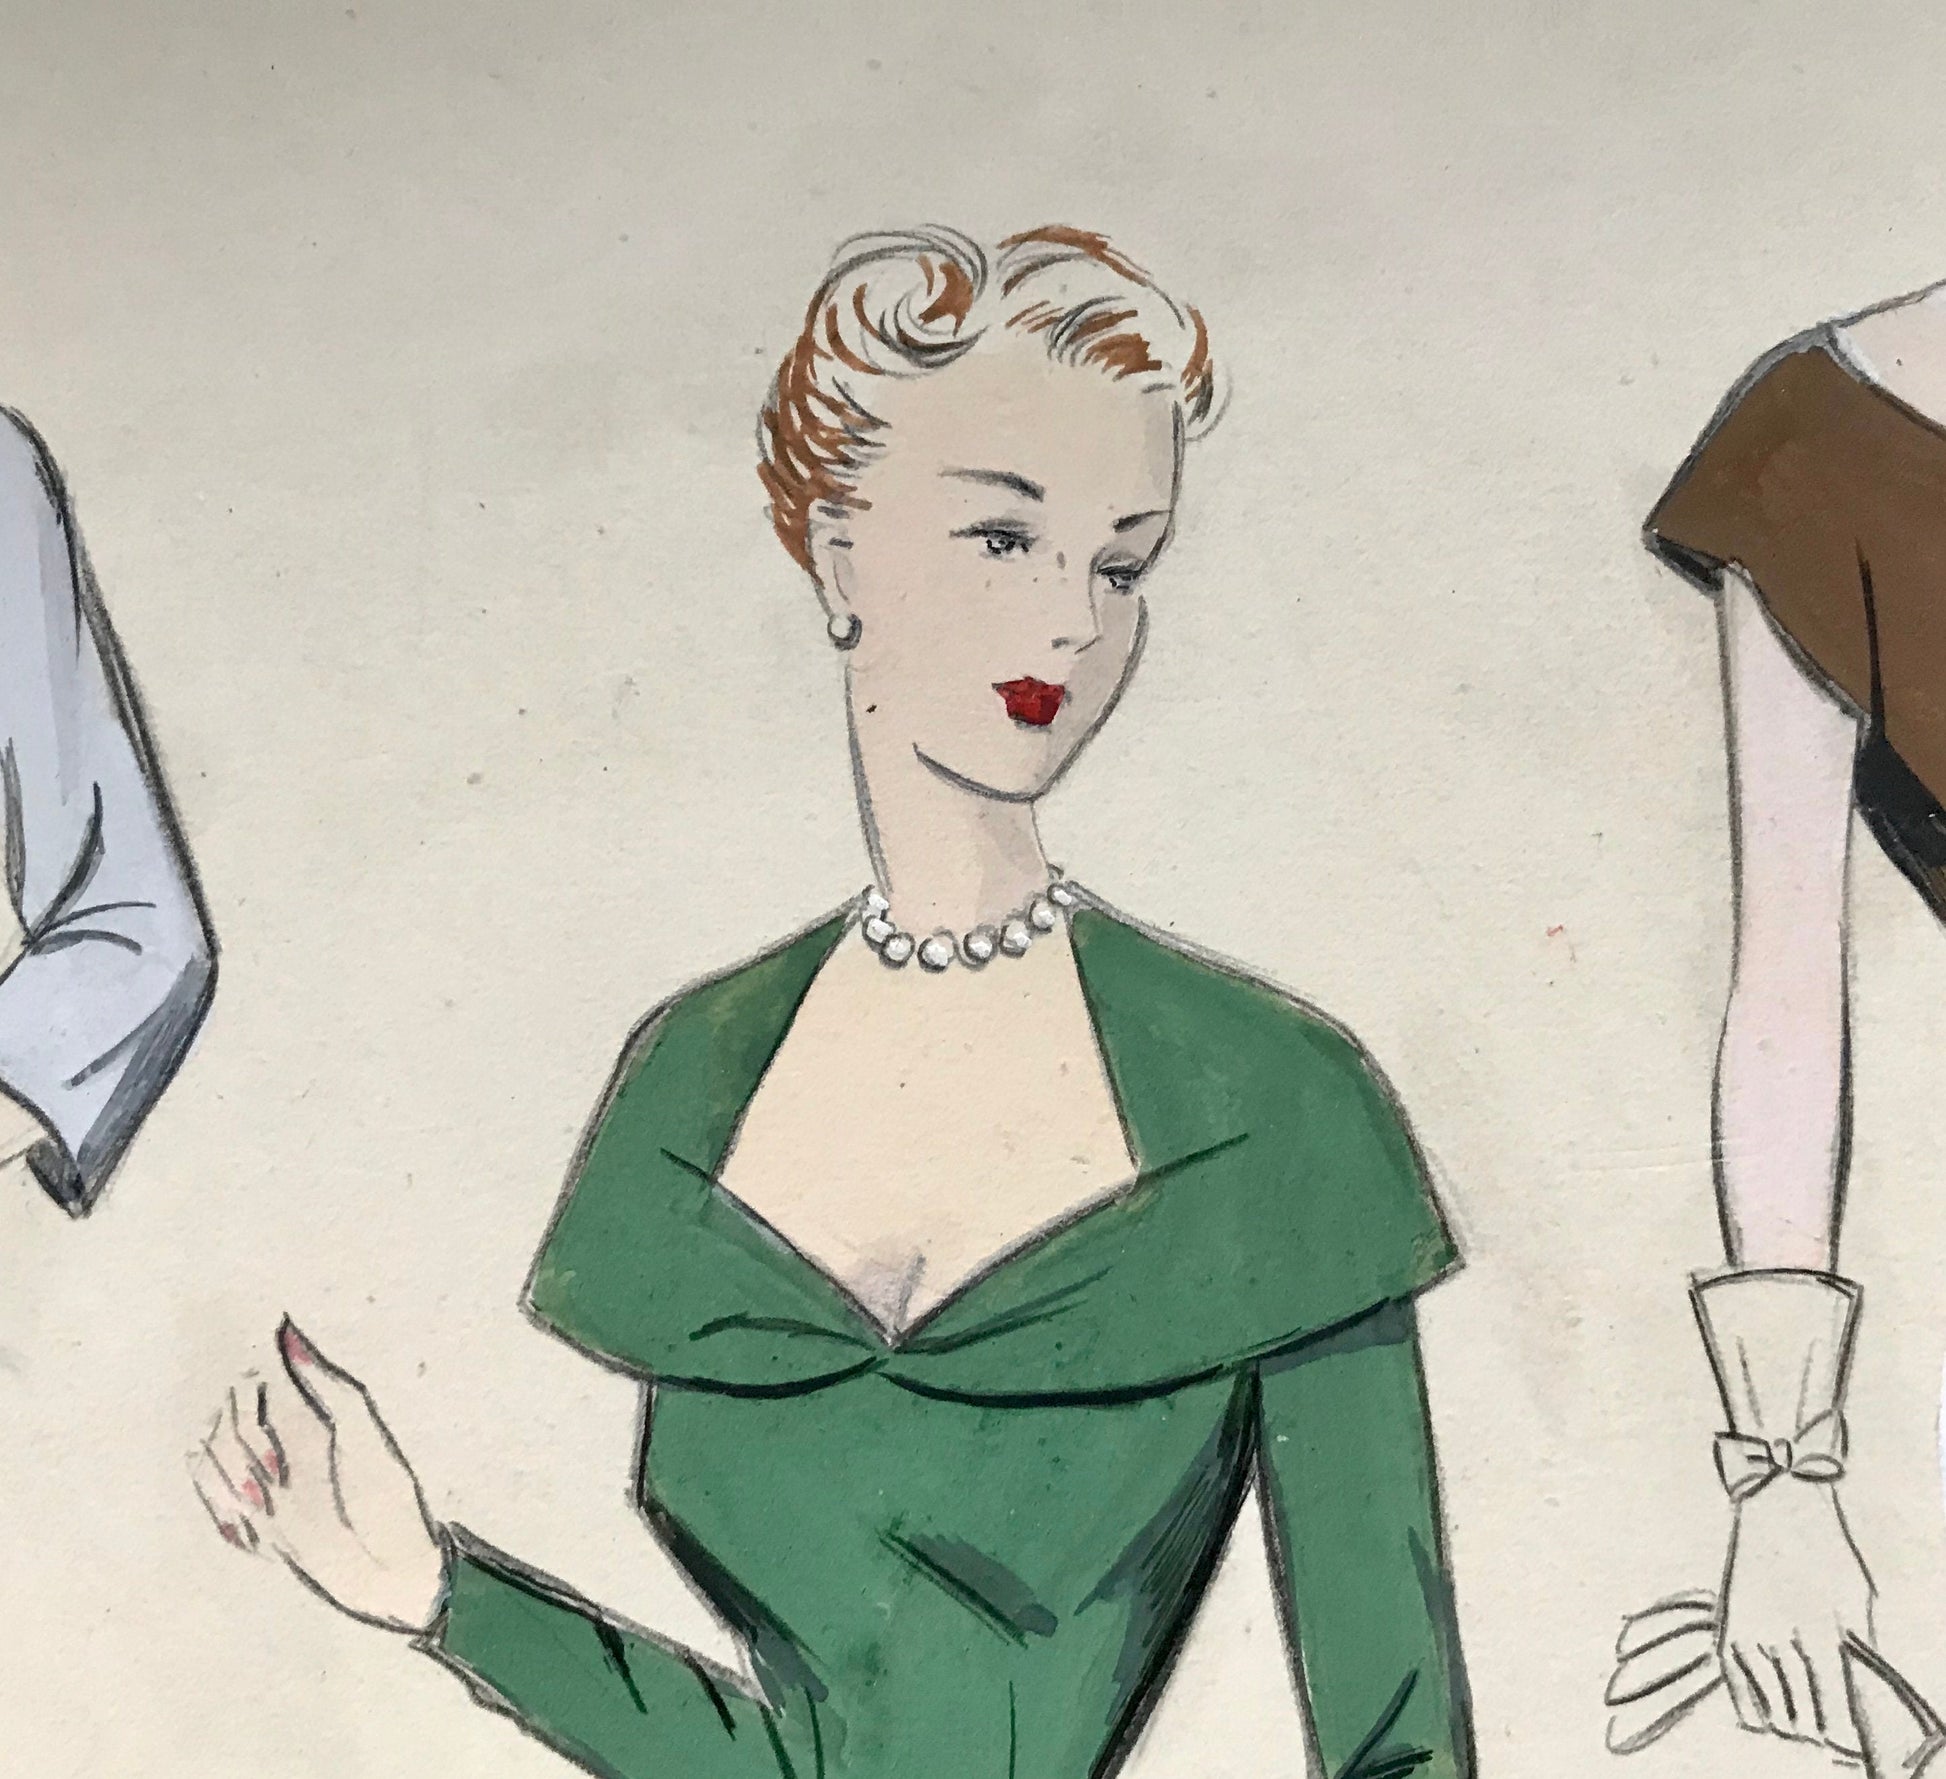 A Large Hand Drawn and Hand Painted Fashion Illustration. From Barcelona, Spain. 1949 - 1950. Size: 51 x 38 cms.